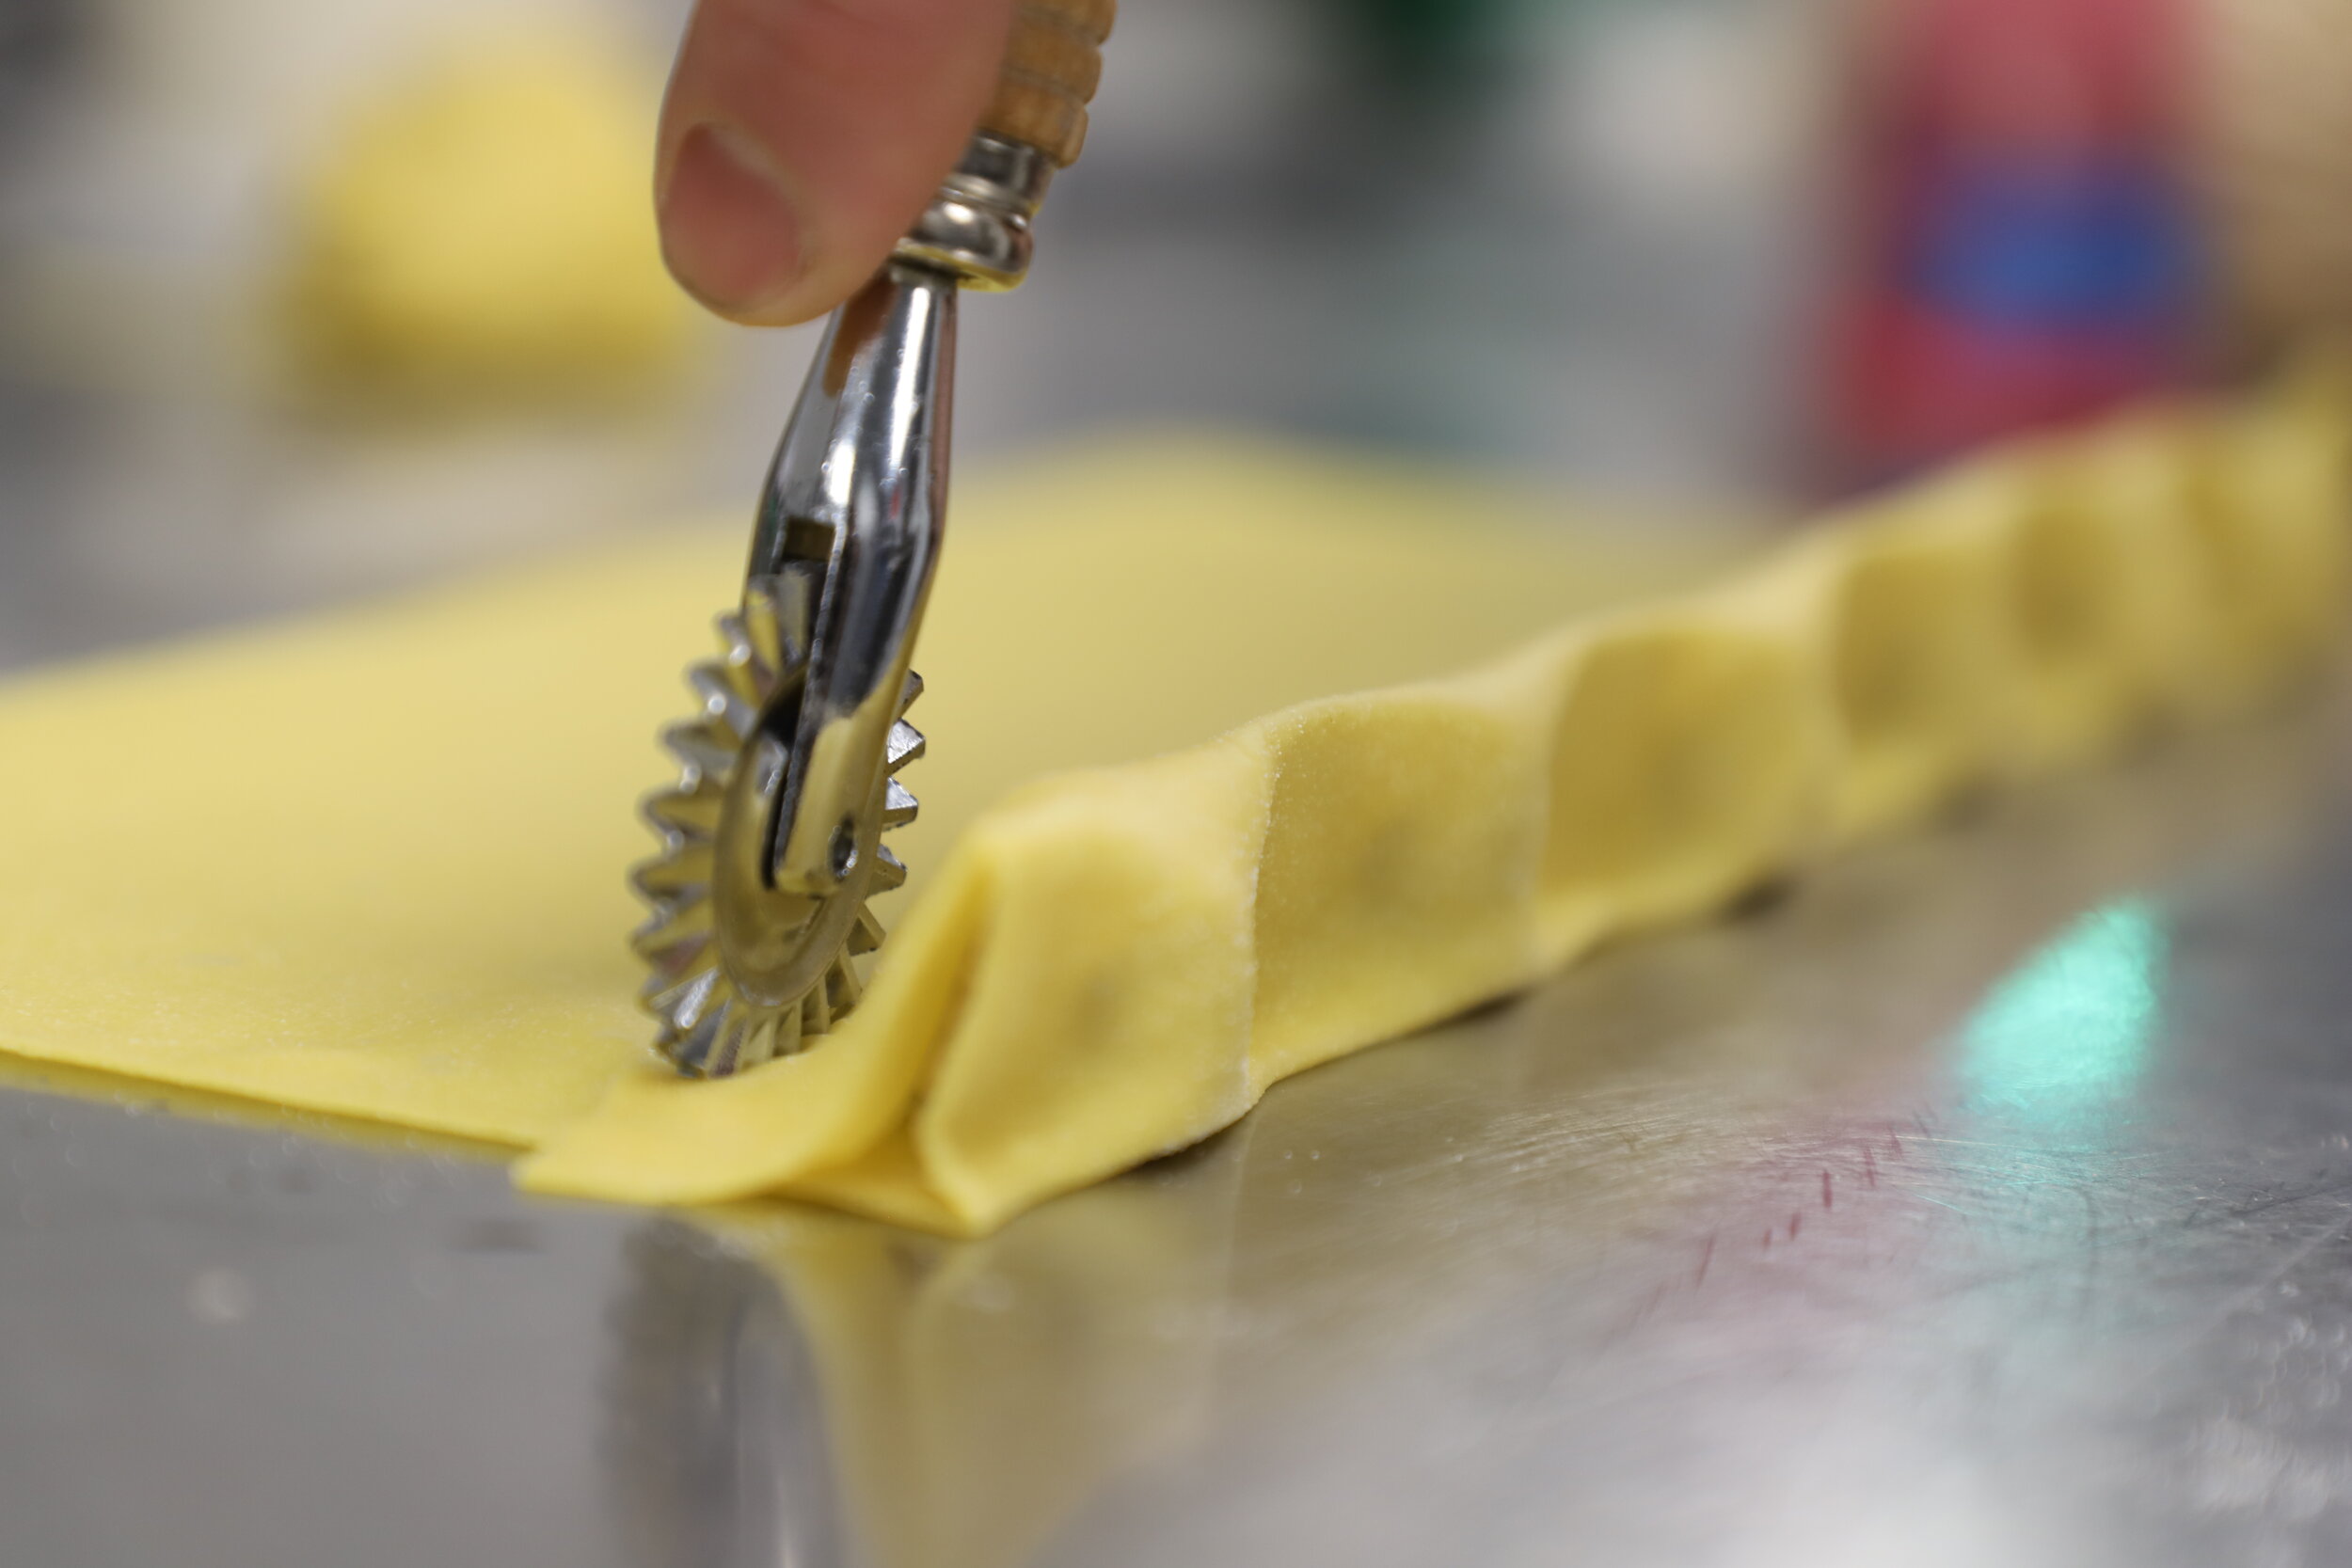 Handmade pasta being filled and cut